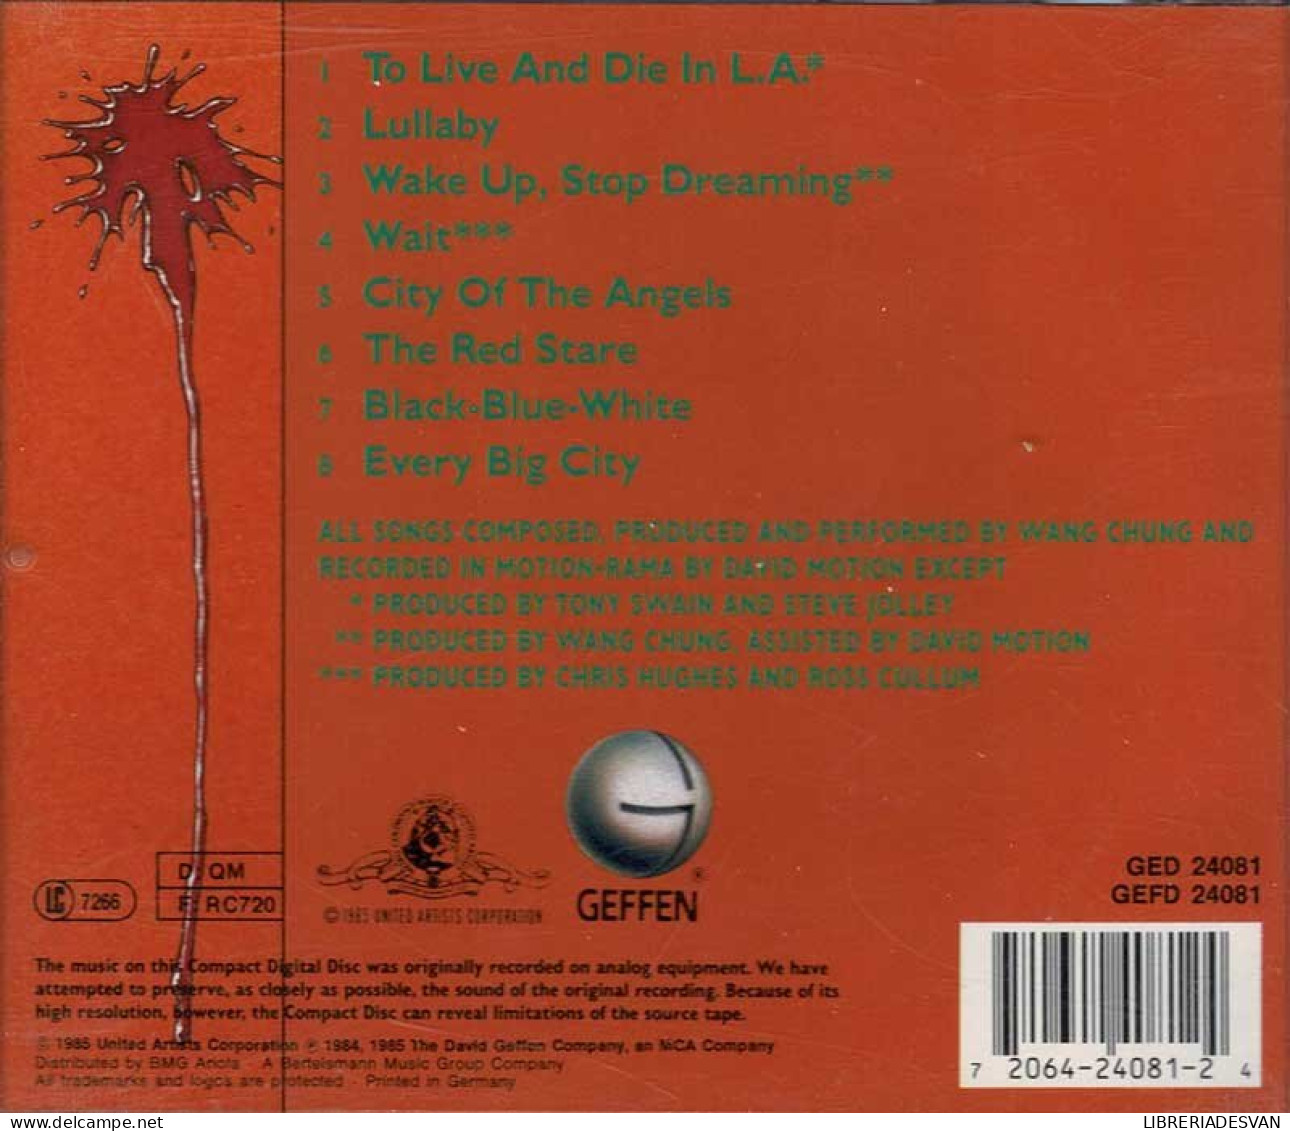 Wang Chung - To Live And Die In L.A. (Original Motion Picture Soundtrack). CD - Soundtracks, Film Music